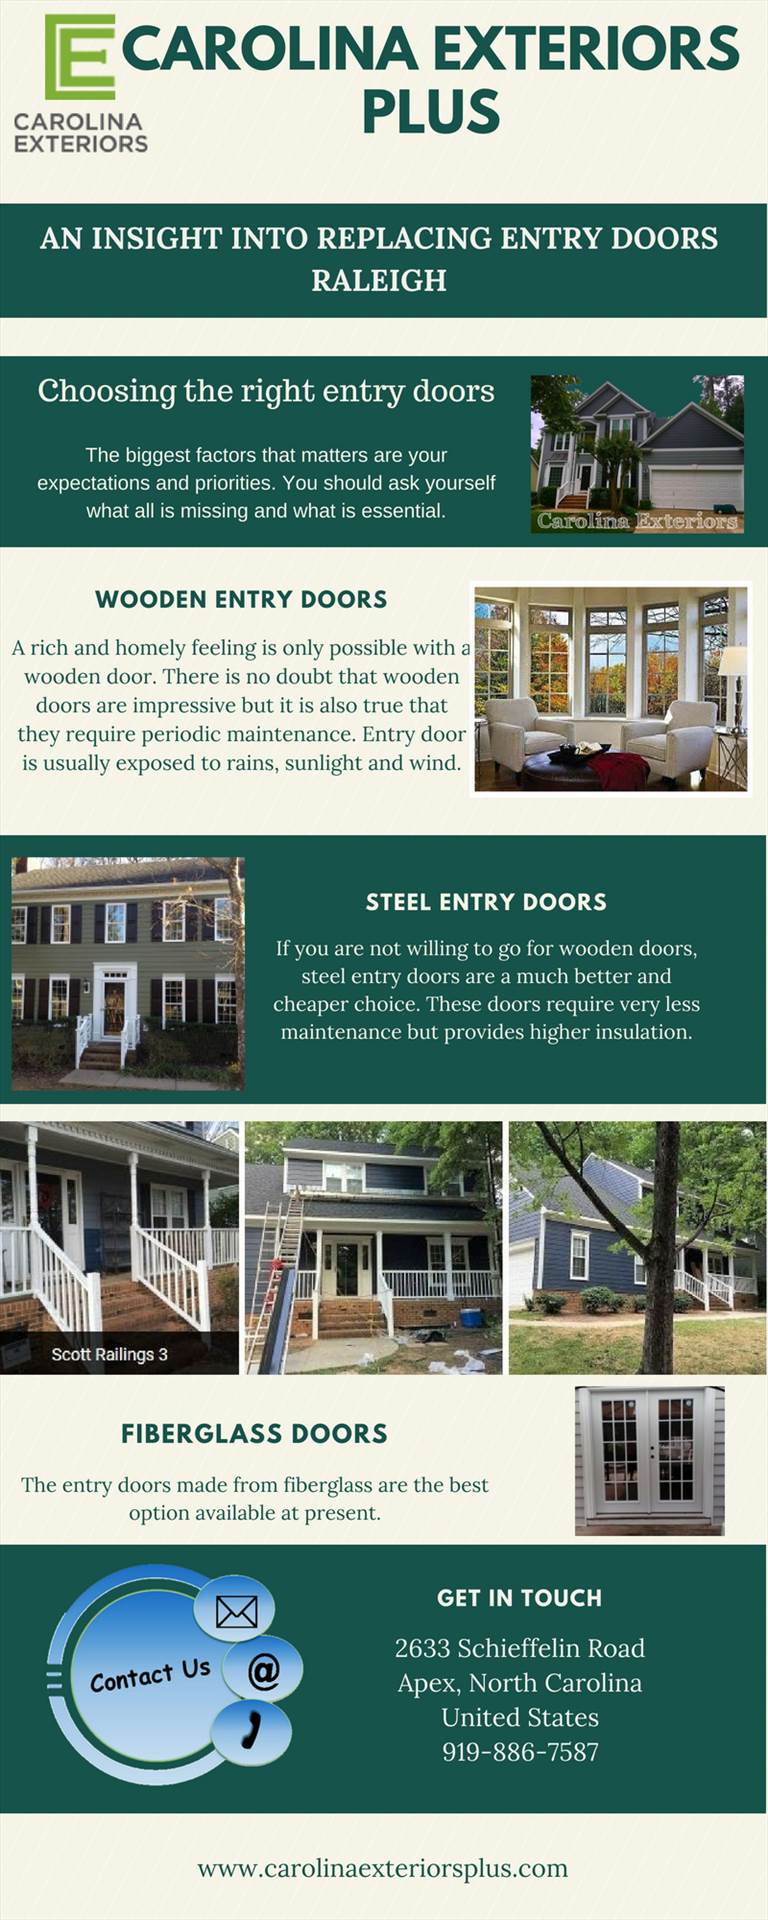 An Insight into Replacing Entry Doors Raleigh.jpg Carolina Exteriors is the Raleigh Triangle area’s trusted partner for James Hardie® Hardieplank siding and trim installation, replacement windows, entry doors, roofing and painting services.
http://www.carolinaexteriorsplus.com/
 by carolinaexteriorsplus